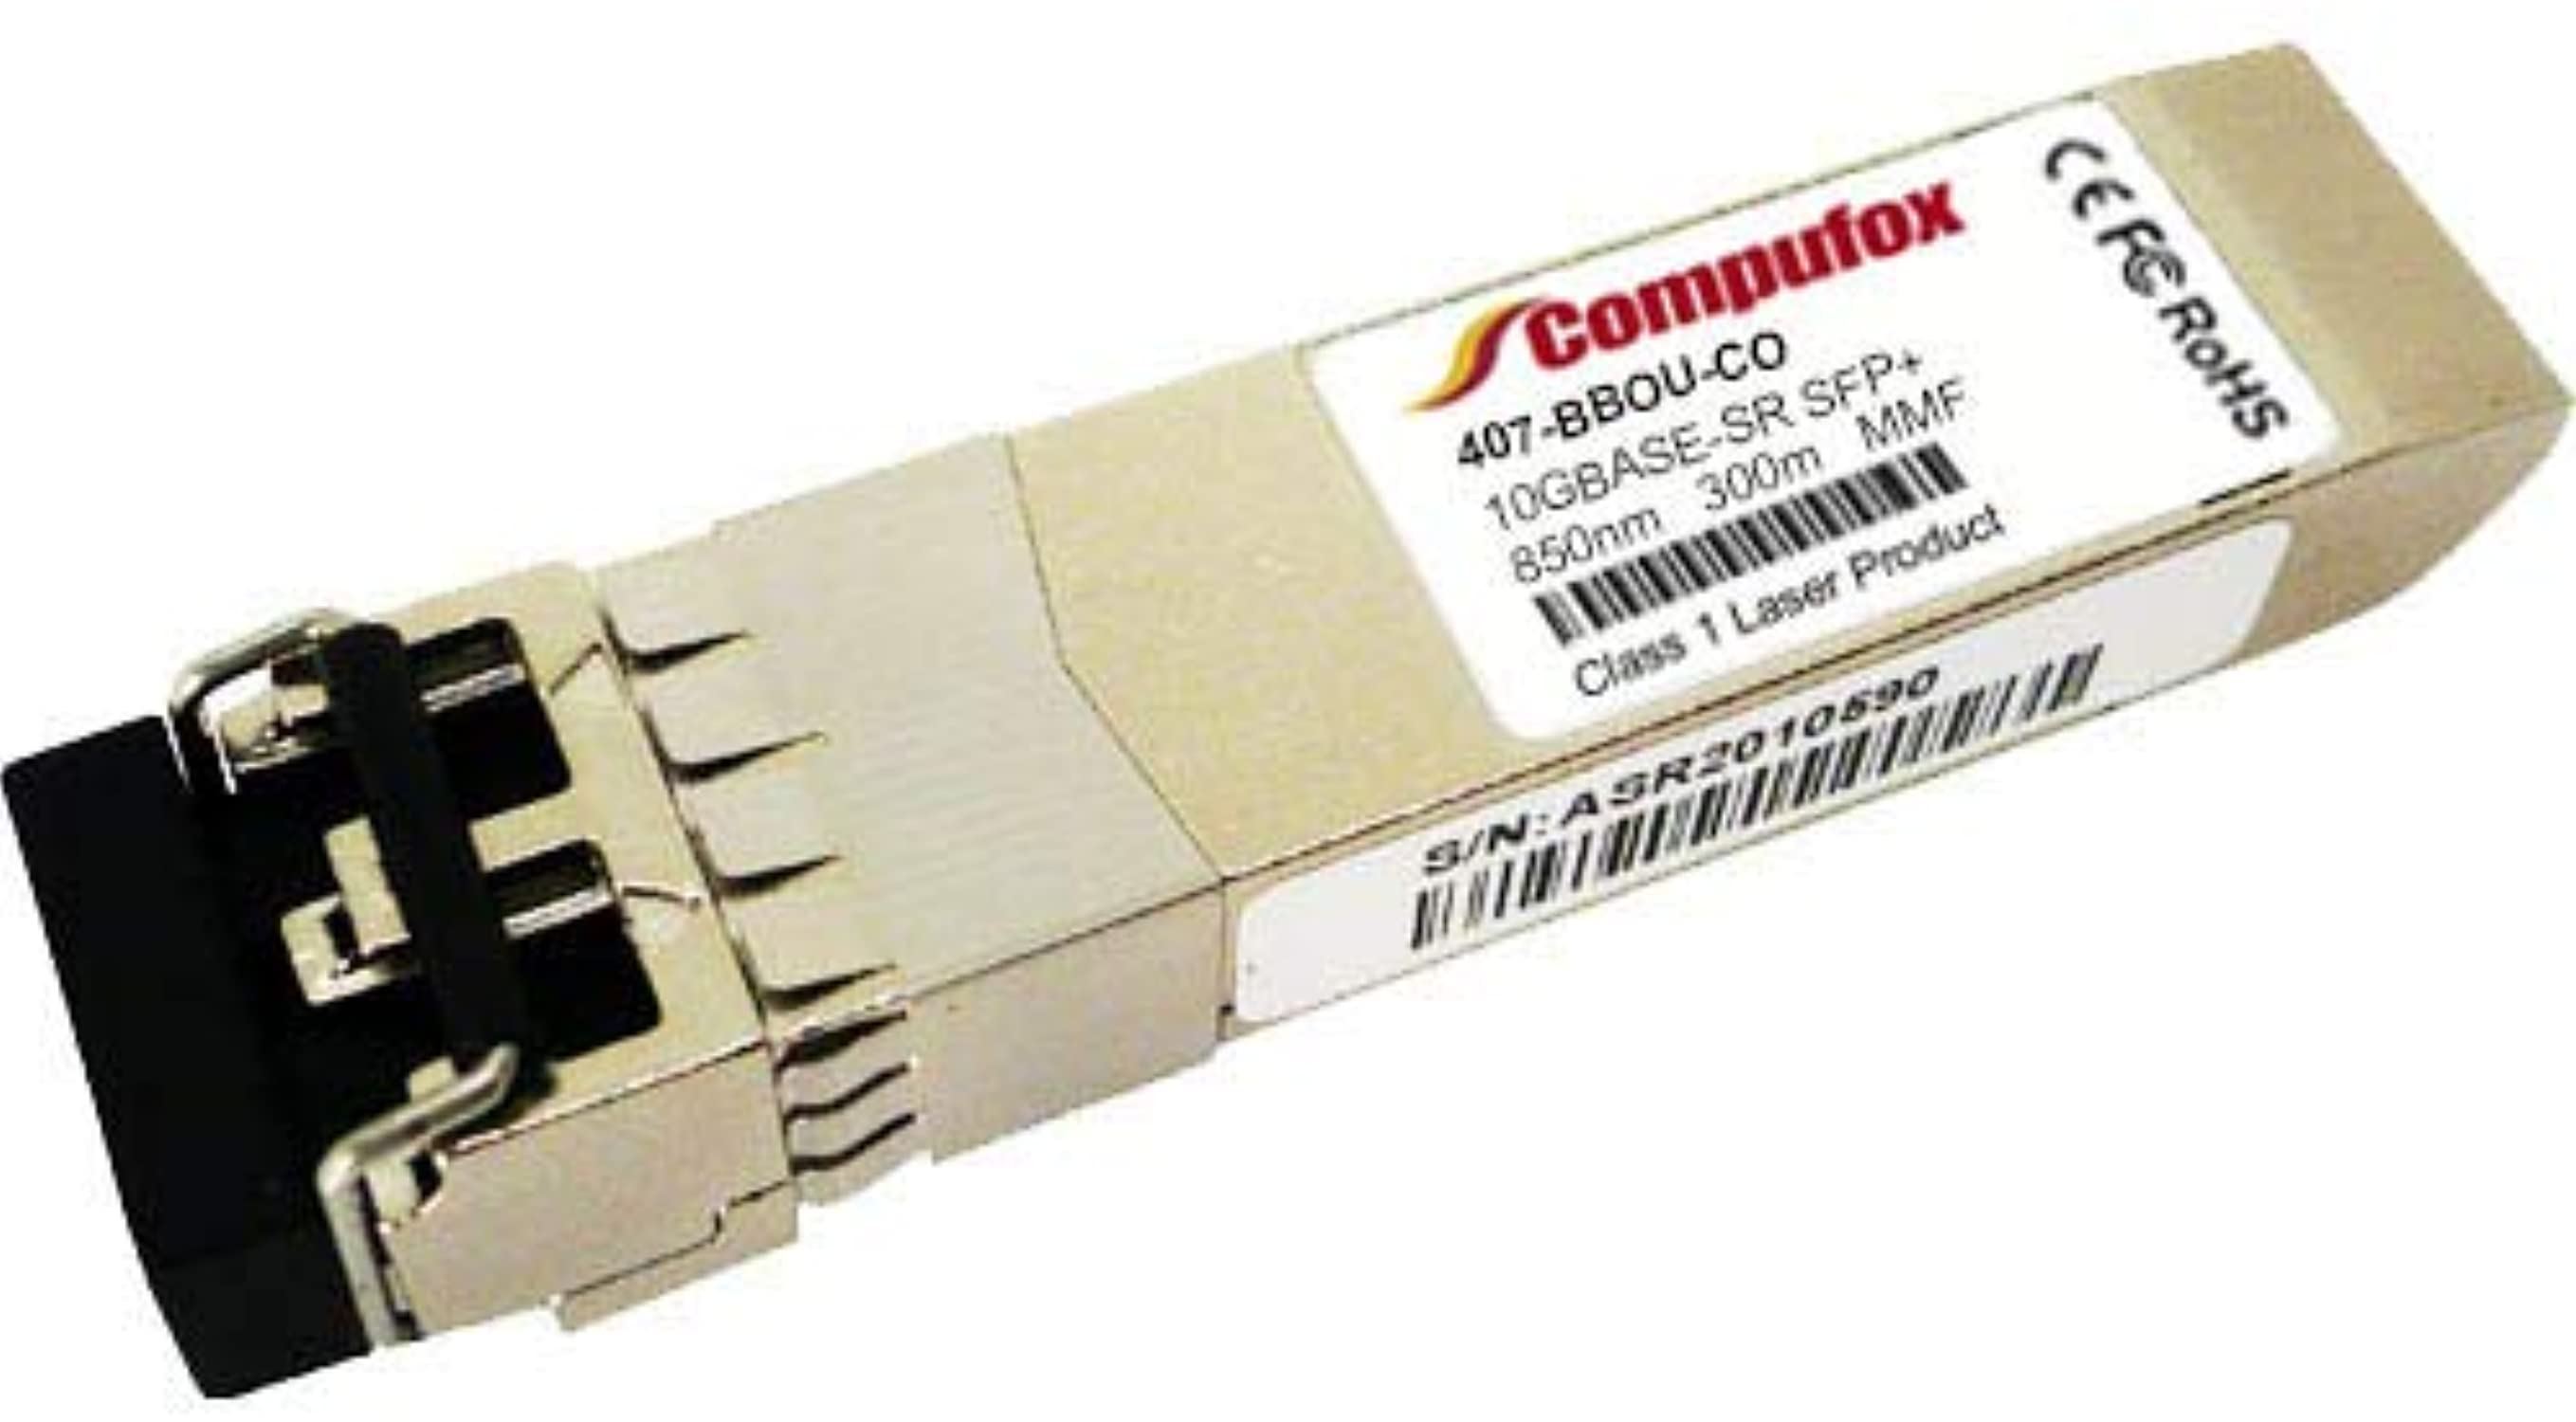 Compatible 407-BBOU SFP+ 10GBase-SR 300m for Dell Networking C9010